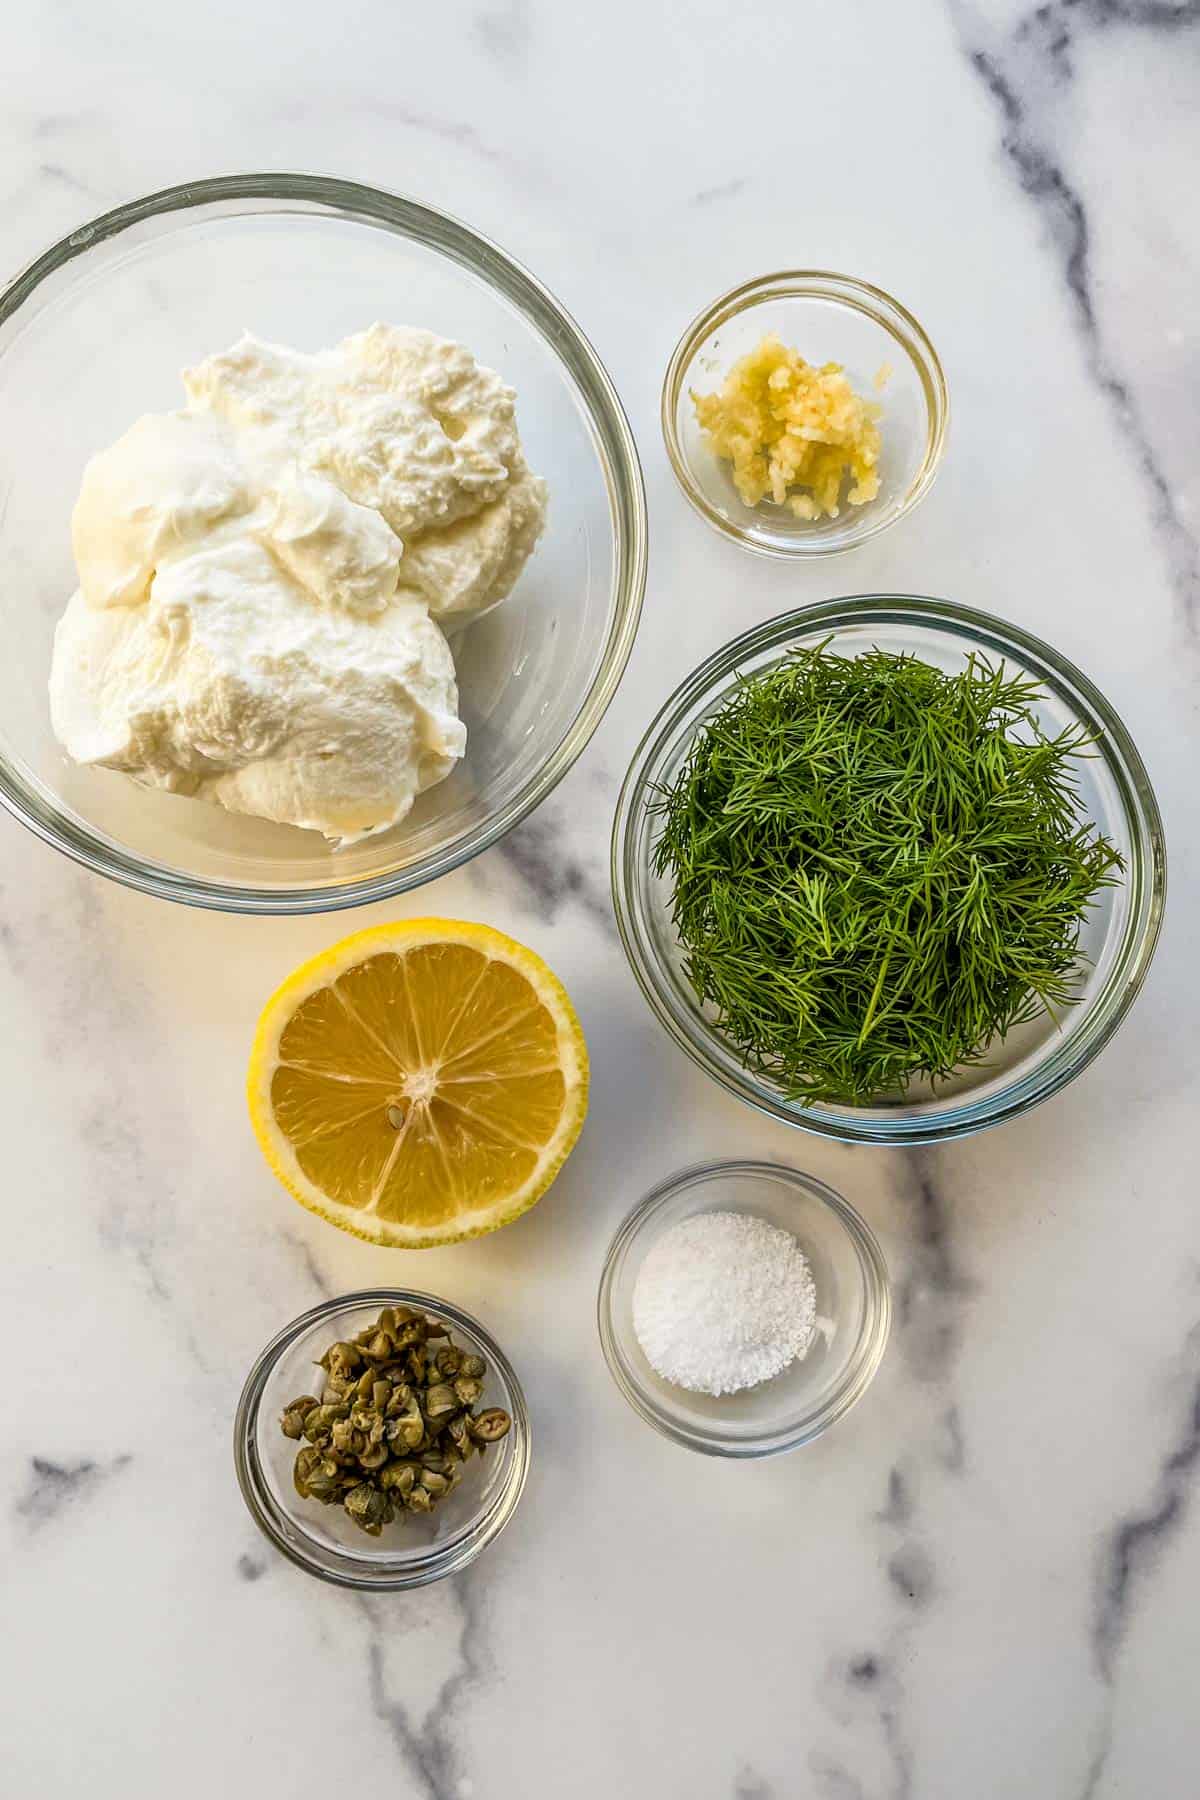 Ingredients for dill sauce in glass bowls.